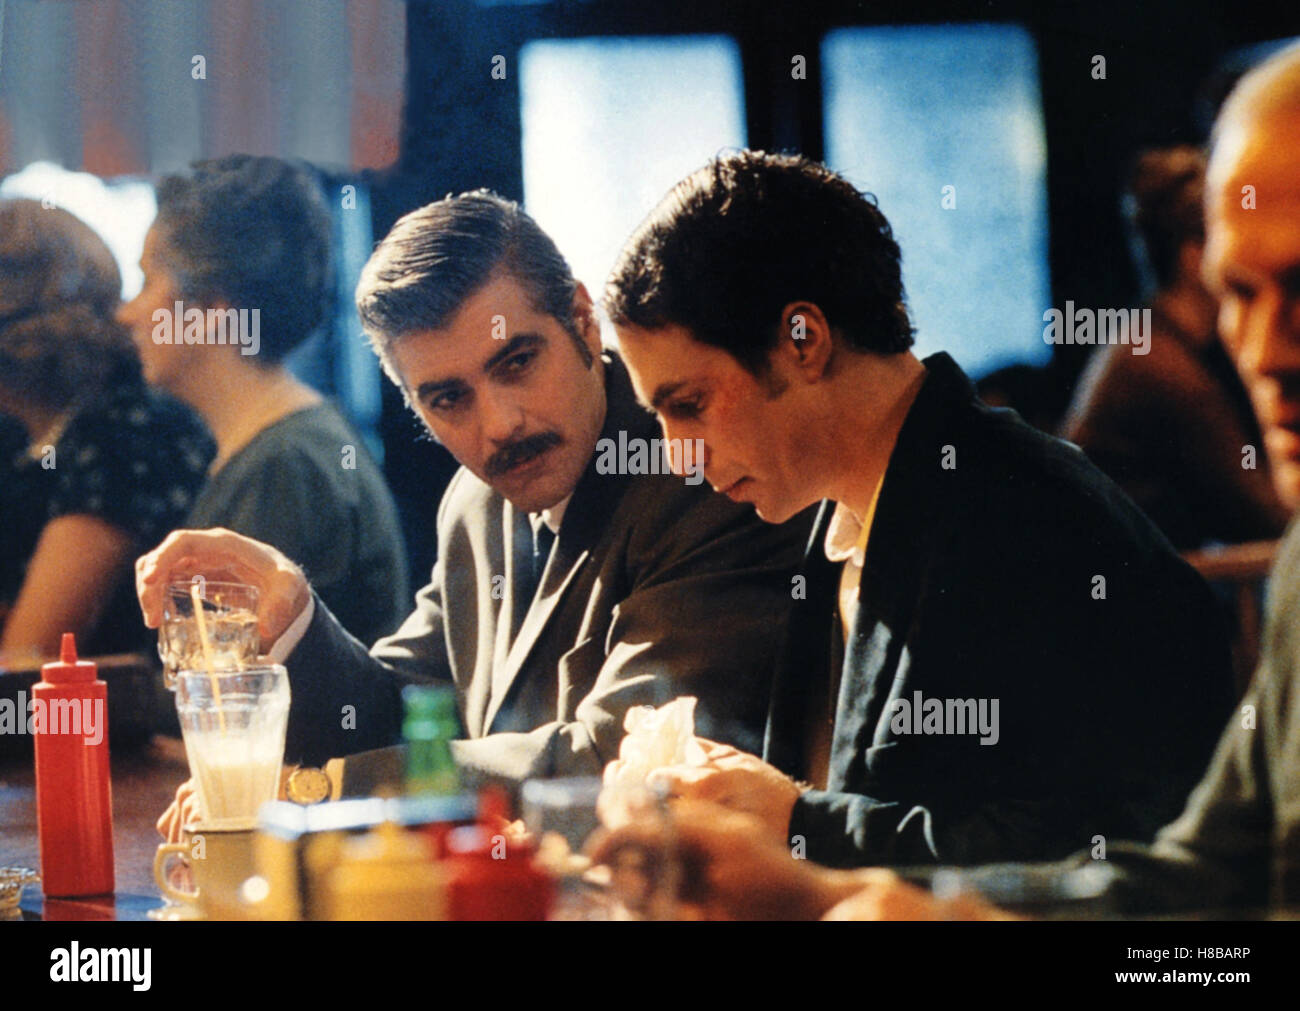 Geständnisse - Confessions of a Dangerous Mind, (CONFESSIONS OF A DANGEROUS MIND) USA 2002, Regie: George Clooney, GEORGE CLOONEY, SAM ROCKWELL, Key: Tresen, Diner, Stock Photo